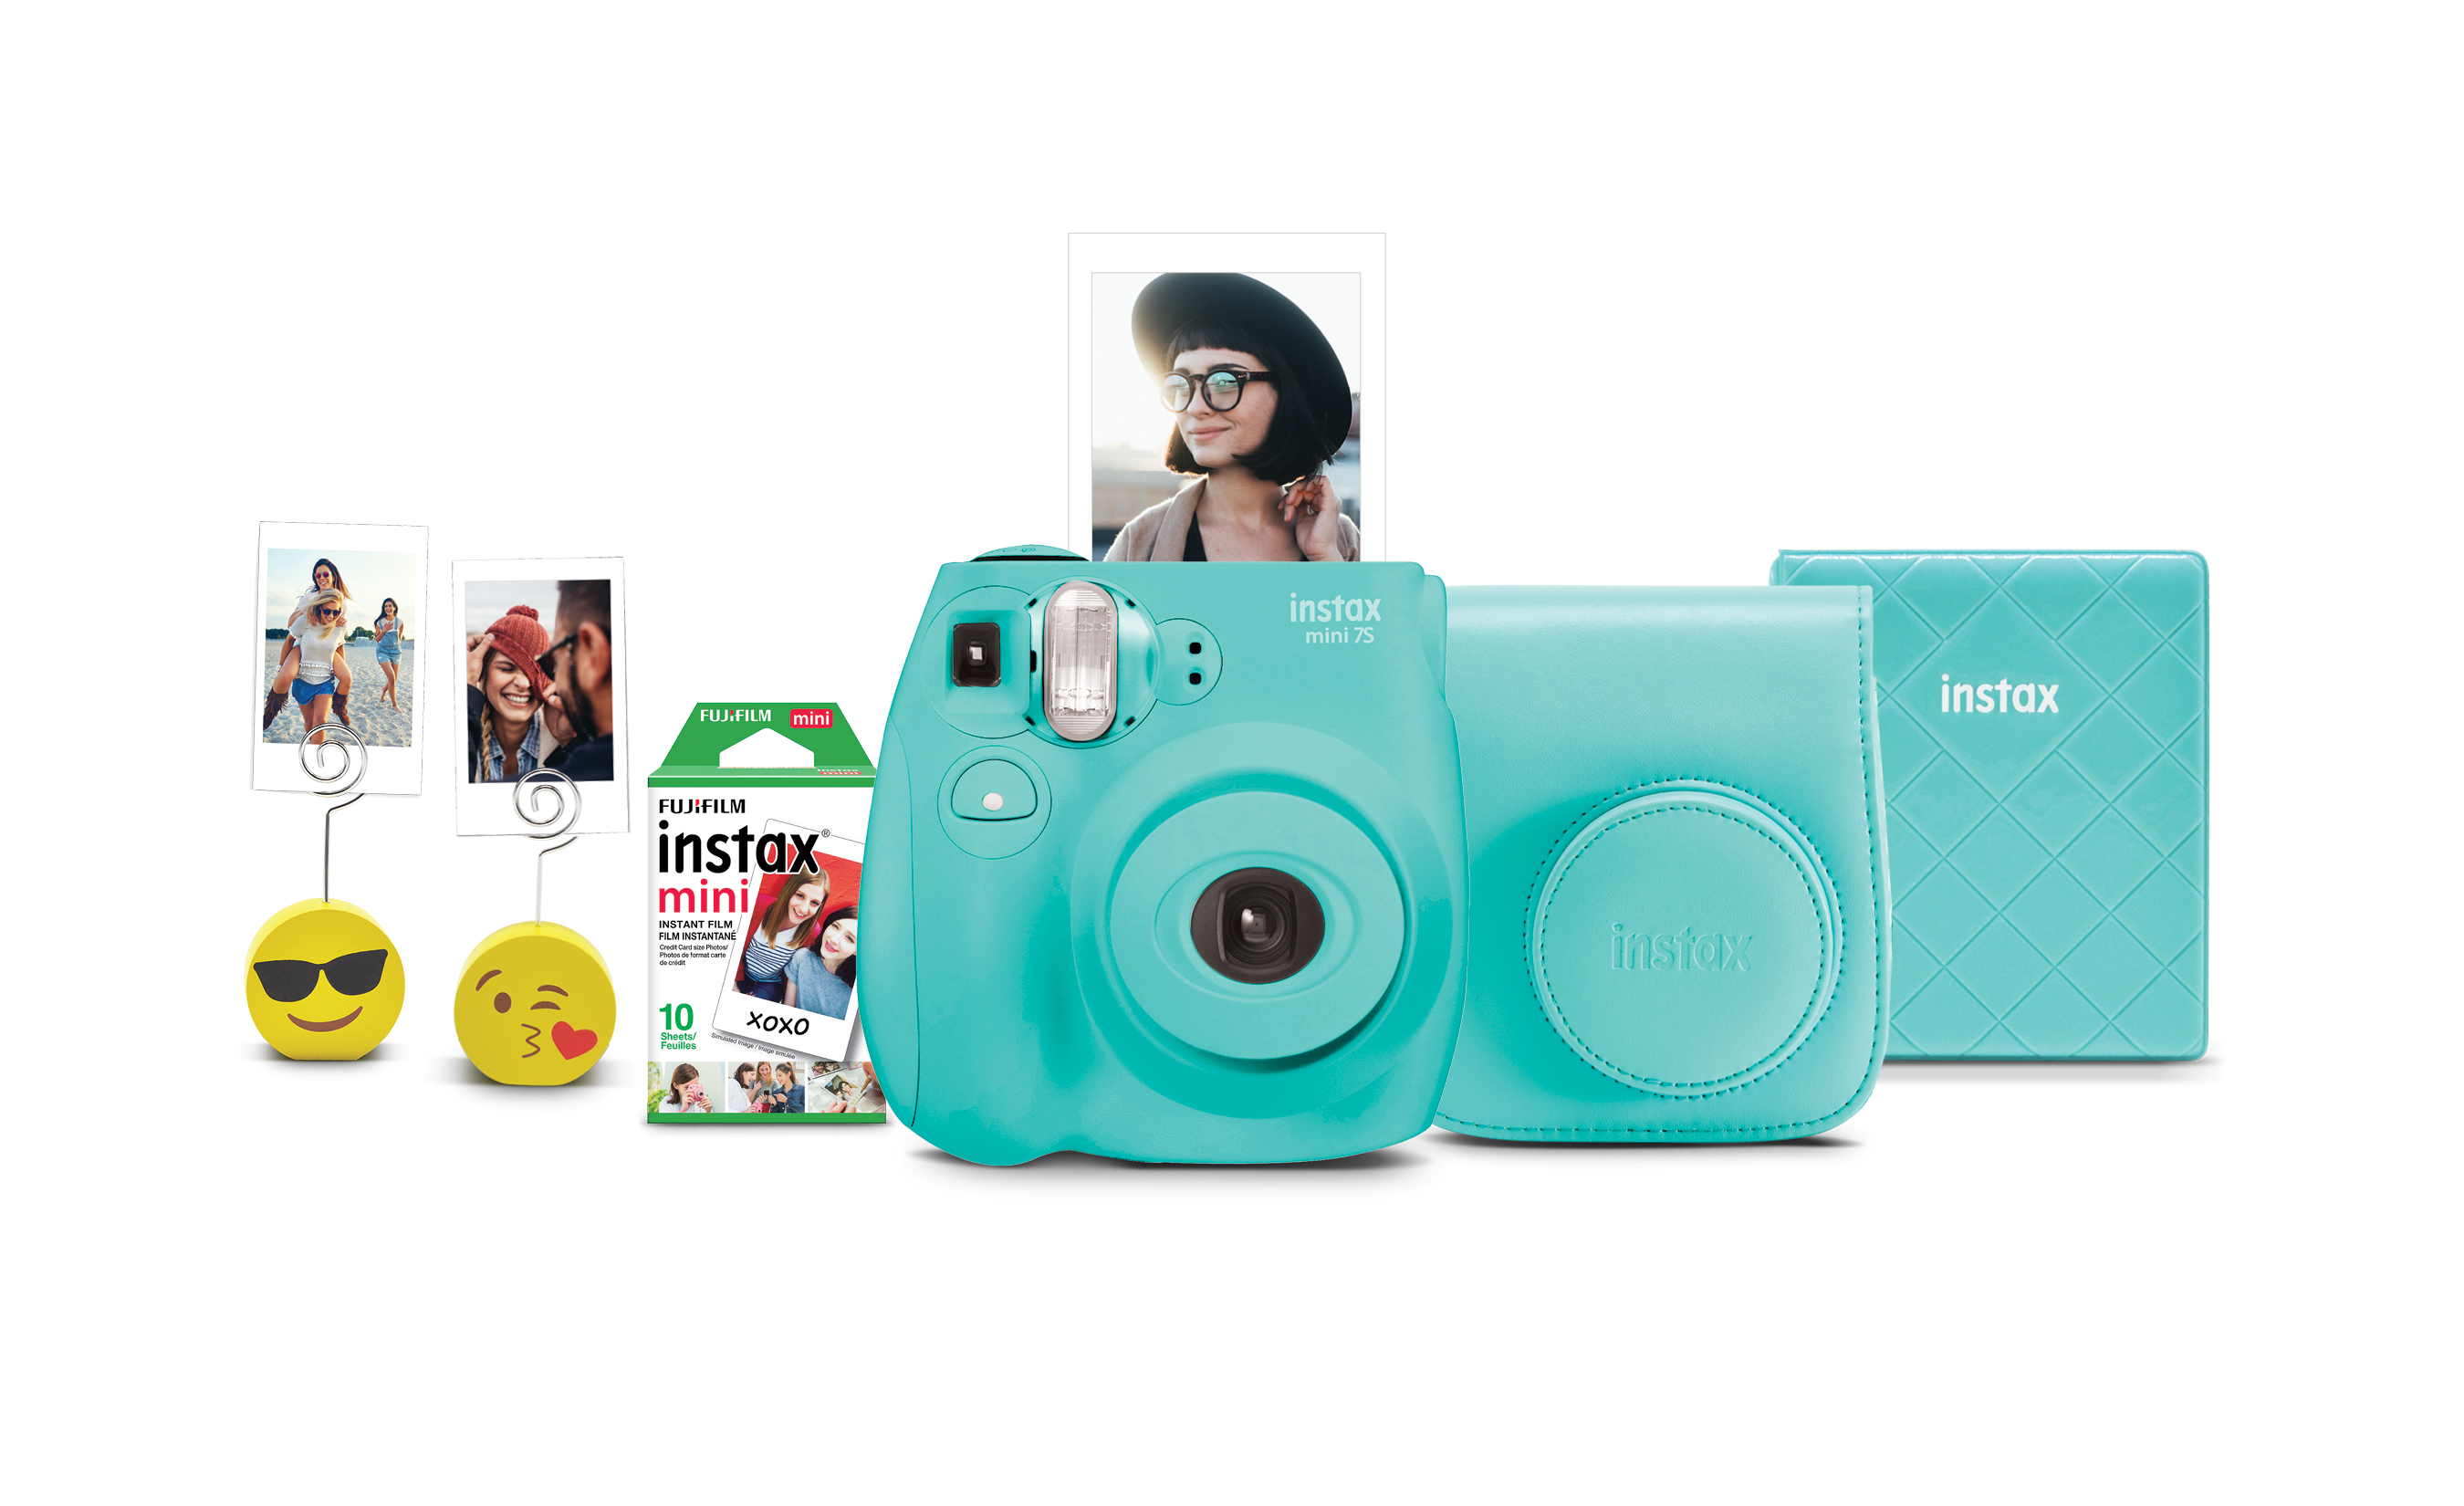 The Instax Mini 40 Doesn't Look like a Toy but It's Still Child's Play